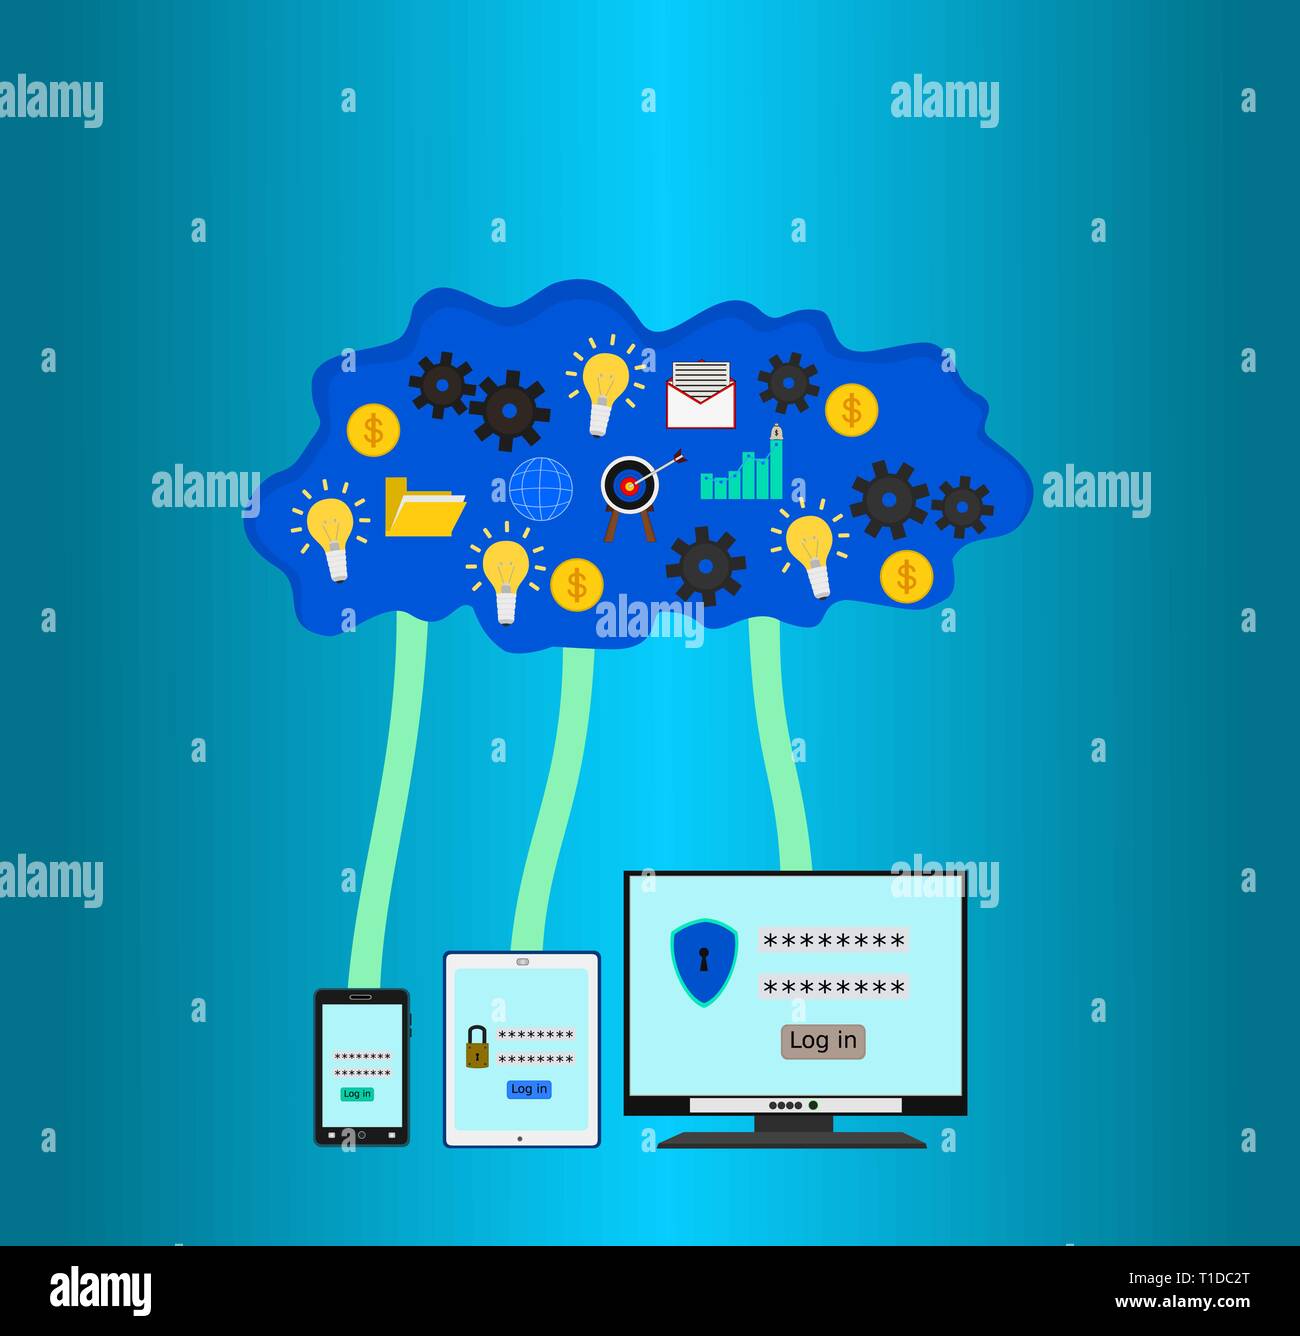 Business technology device access cloud internet with safety information Stock Vector